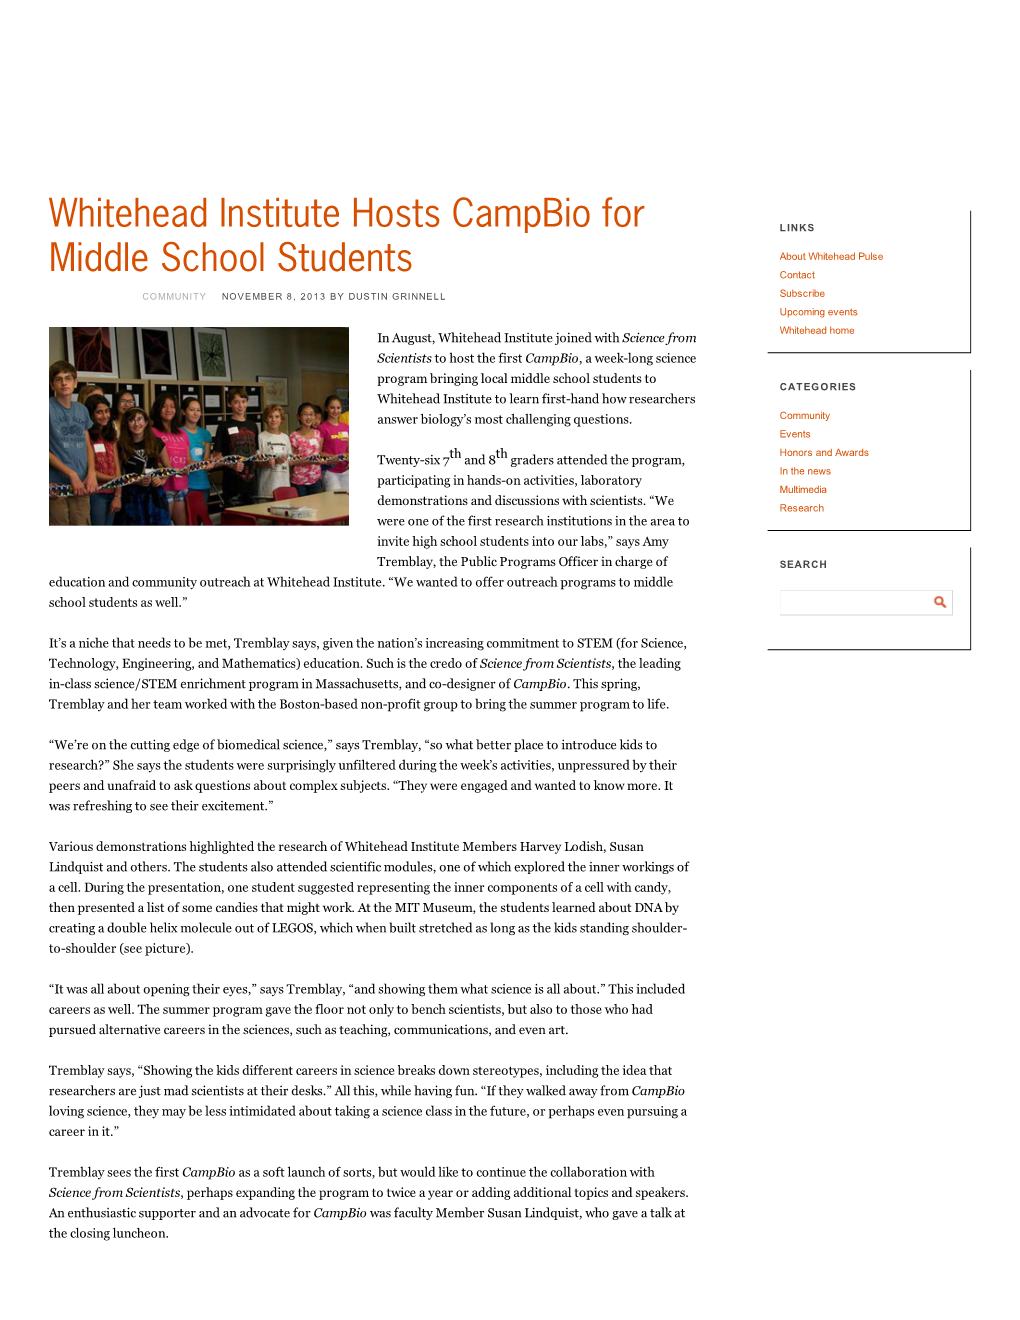 Whitehead Institute Hosts Campbio for Middle School Students